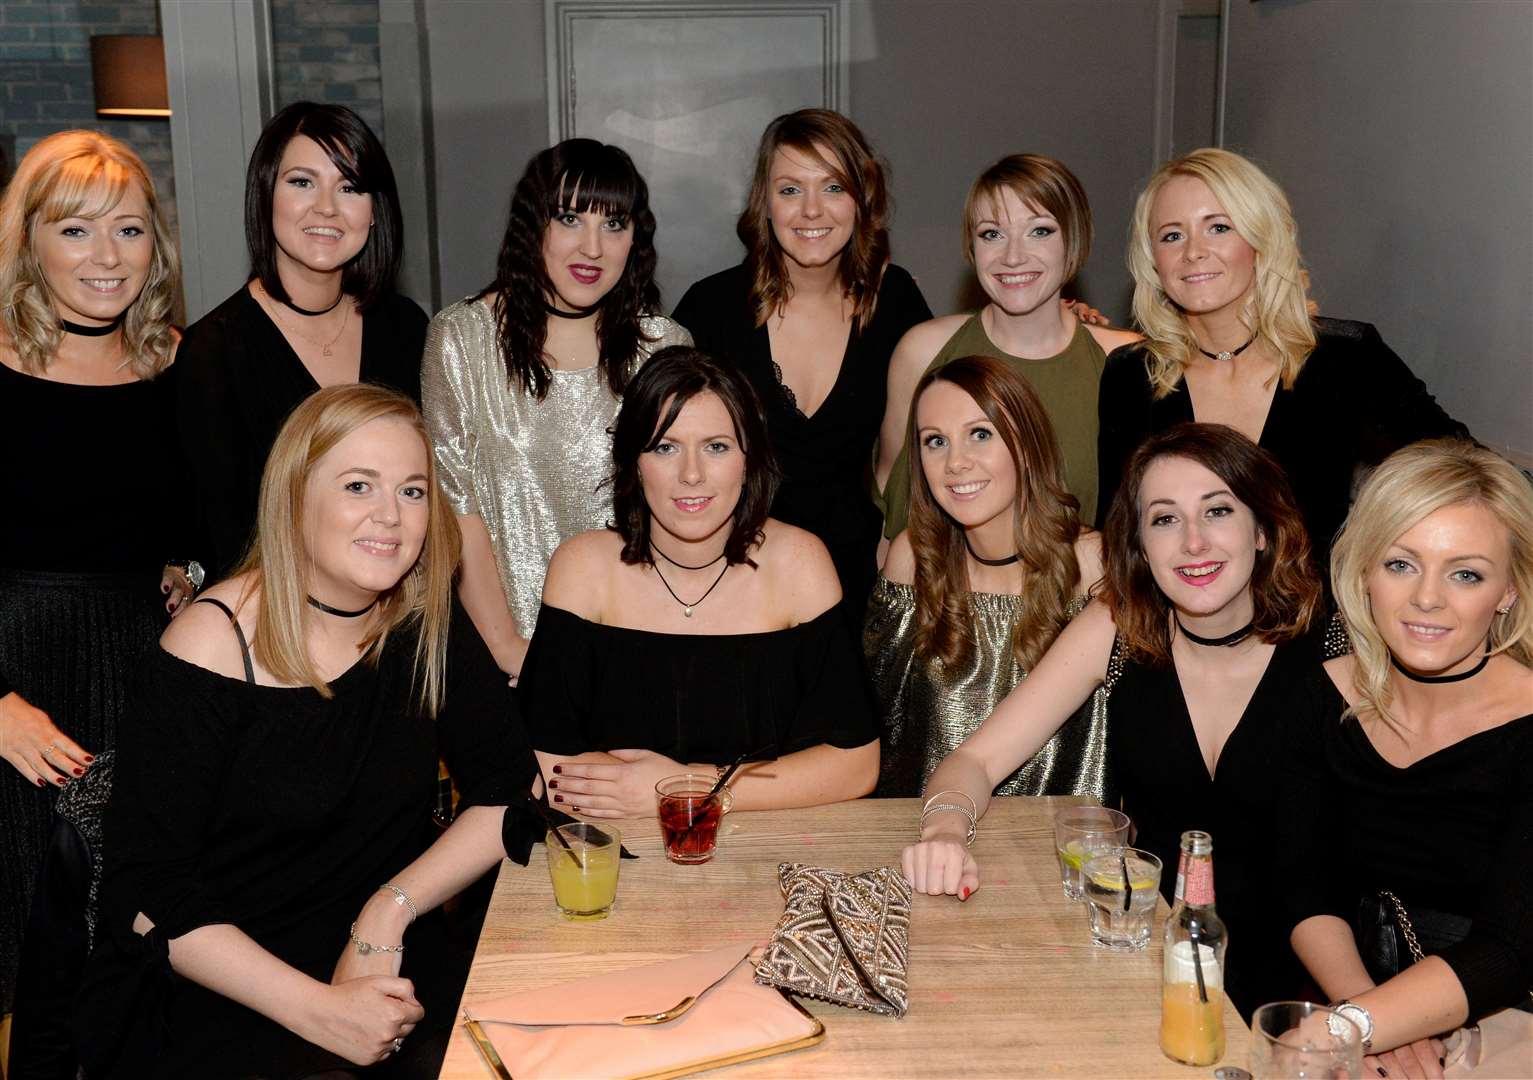 Sarah Robertson(centre) enjoying her 30th birthday with friends.